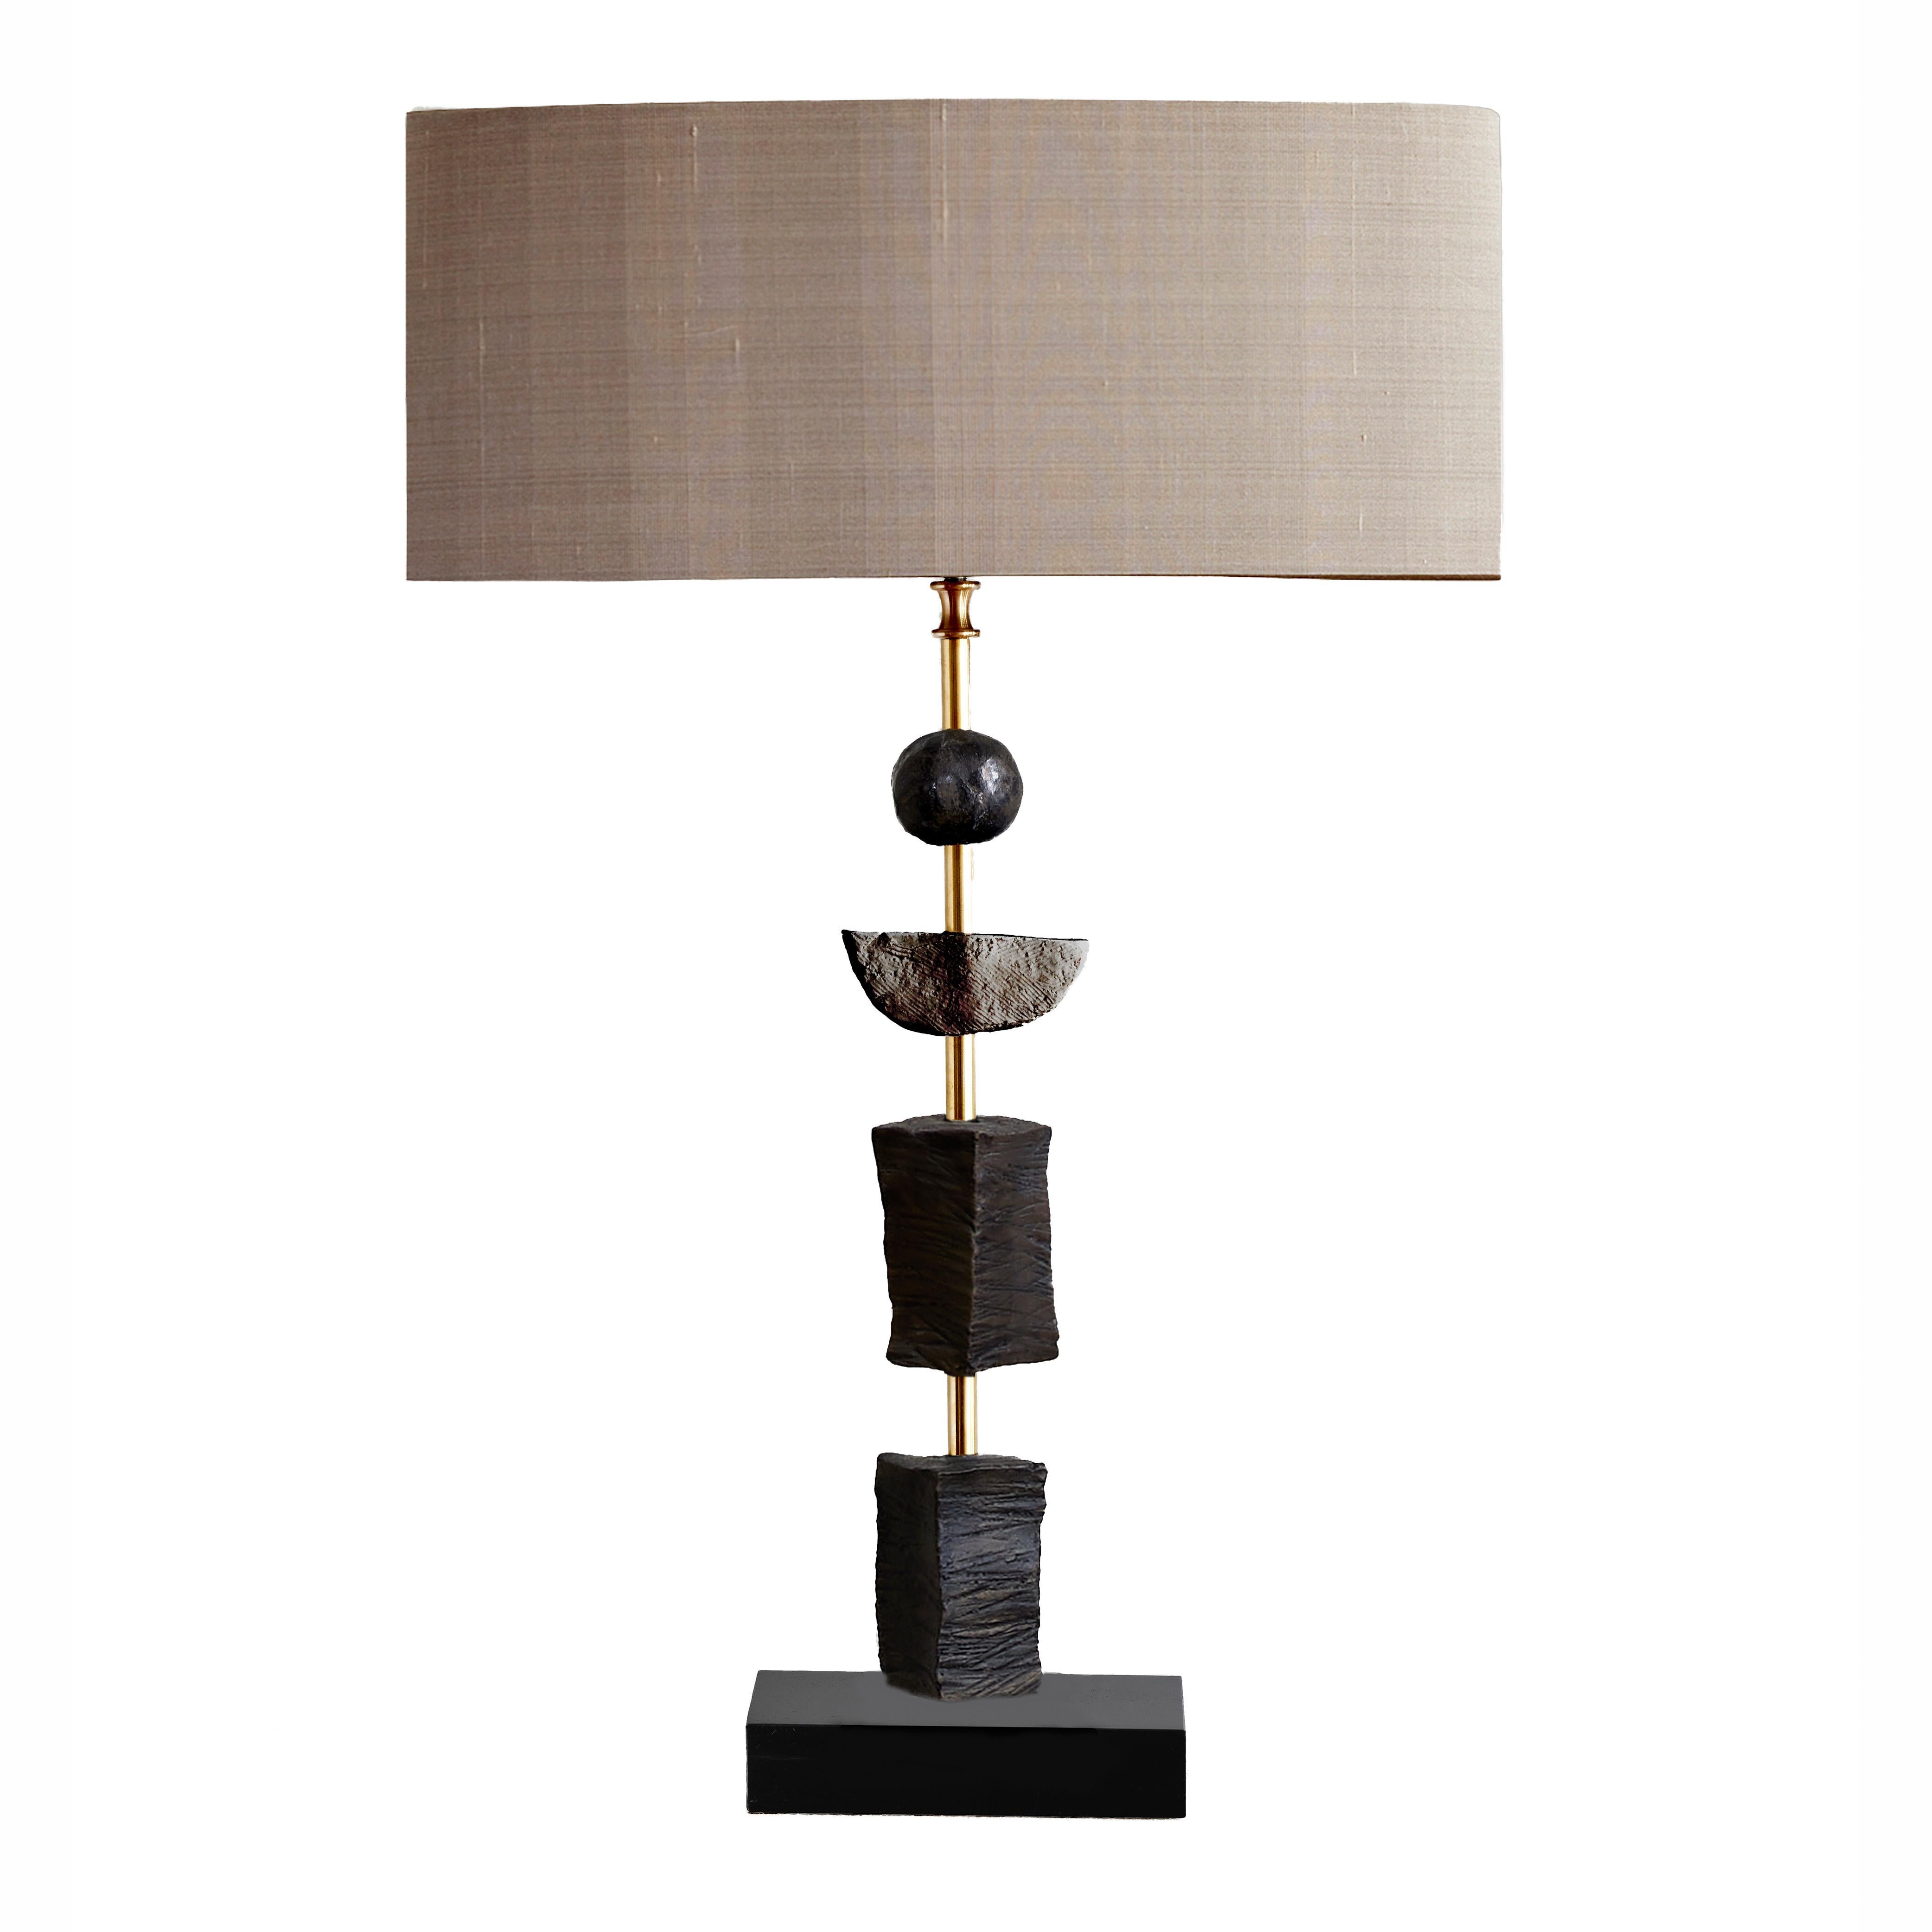 Modern 'Synergy'  Table Lamps in Dark Patina, European, Contemporary by Margit Wittig For Sale